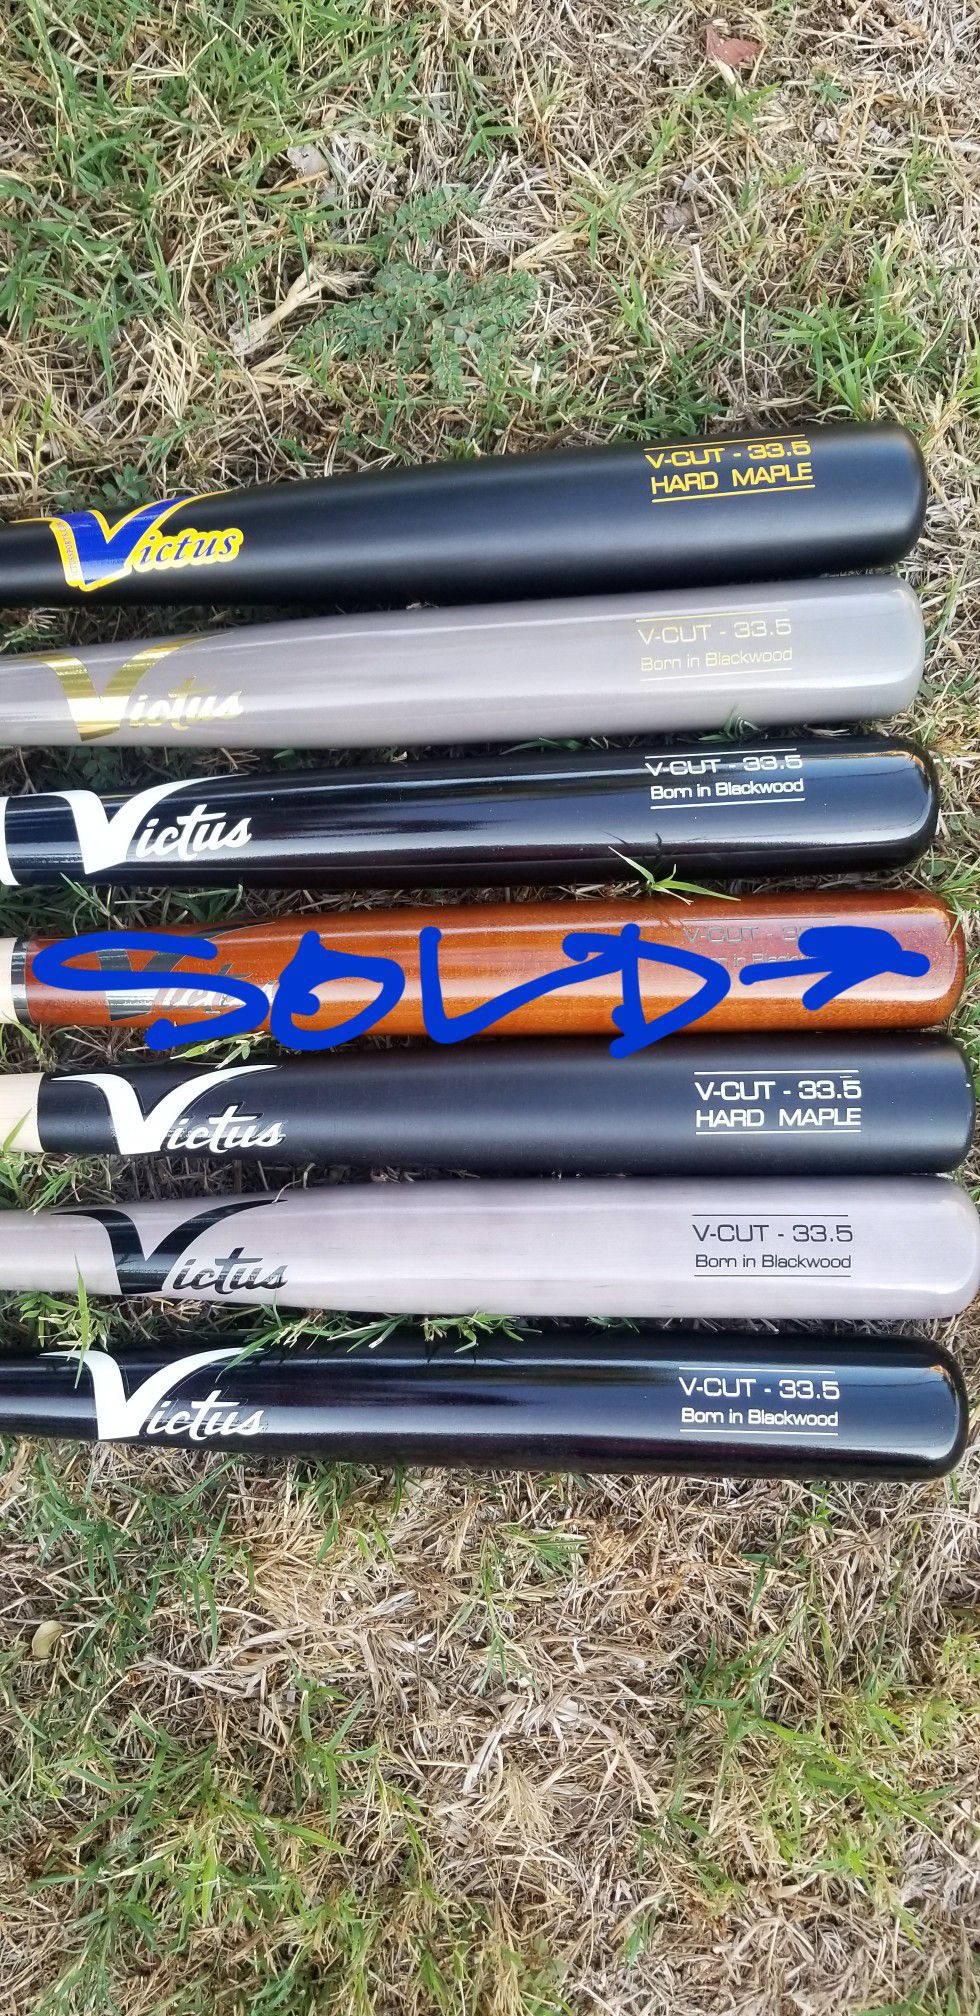 Brand New Victus V-Cut Pro Maple Ink Spot Baseball Bats Size 33.5" What Color You Like.